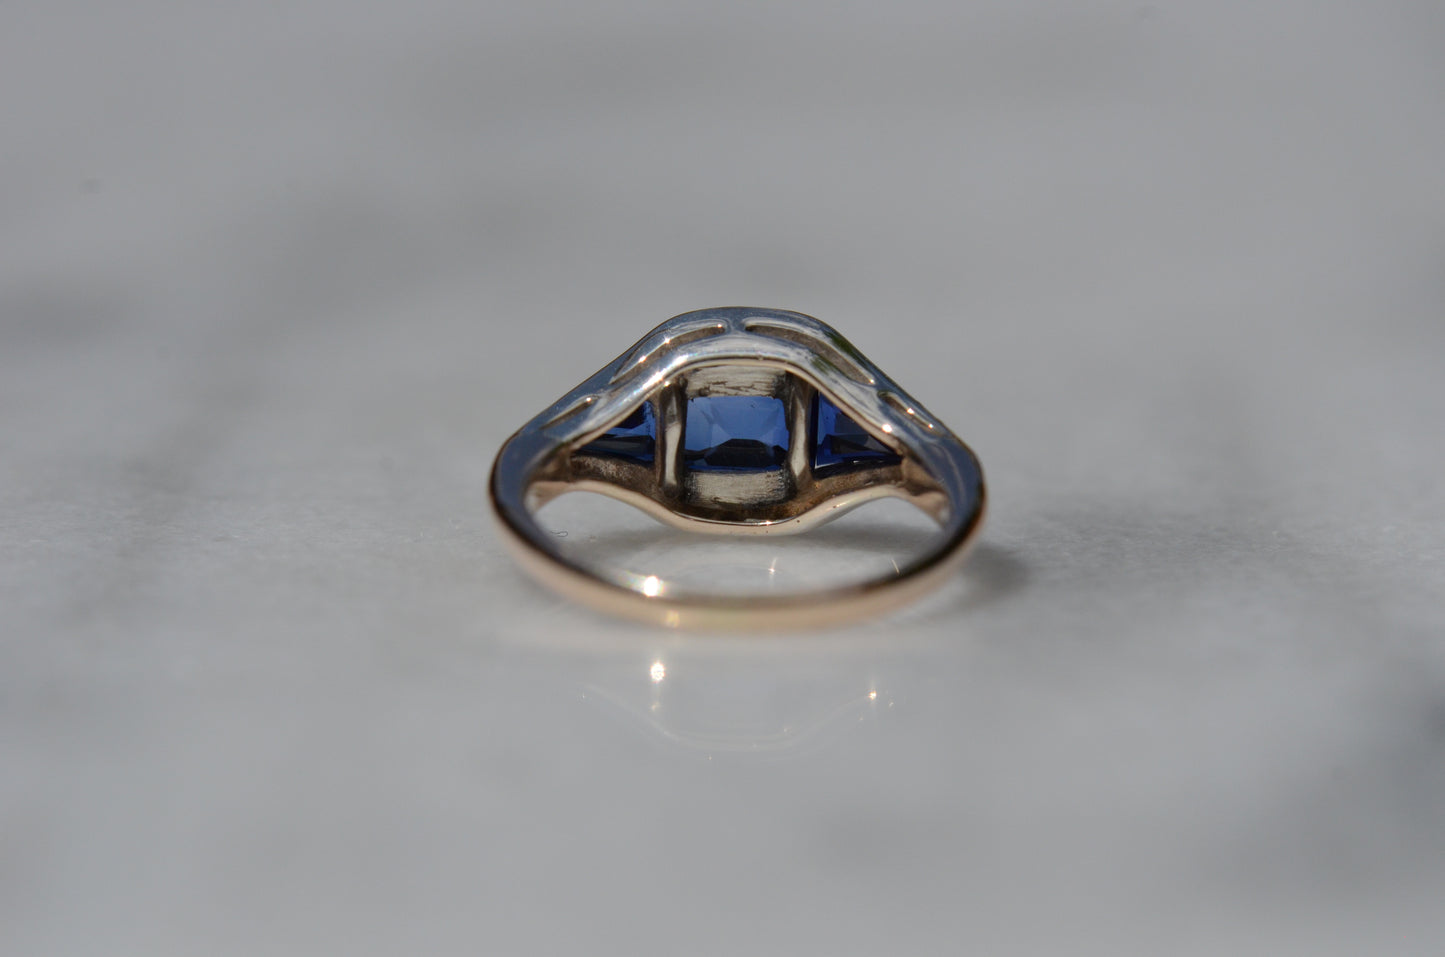 The ring, shown from behind and with the back of the head in focus, shows the open setting behind the blue past and solid, closed silver settings behind the colorless paste.